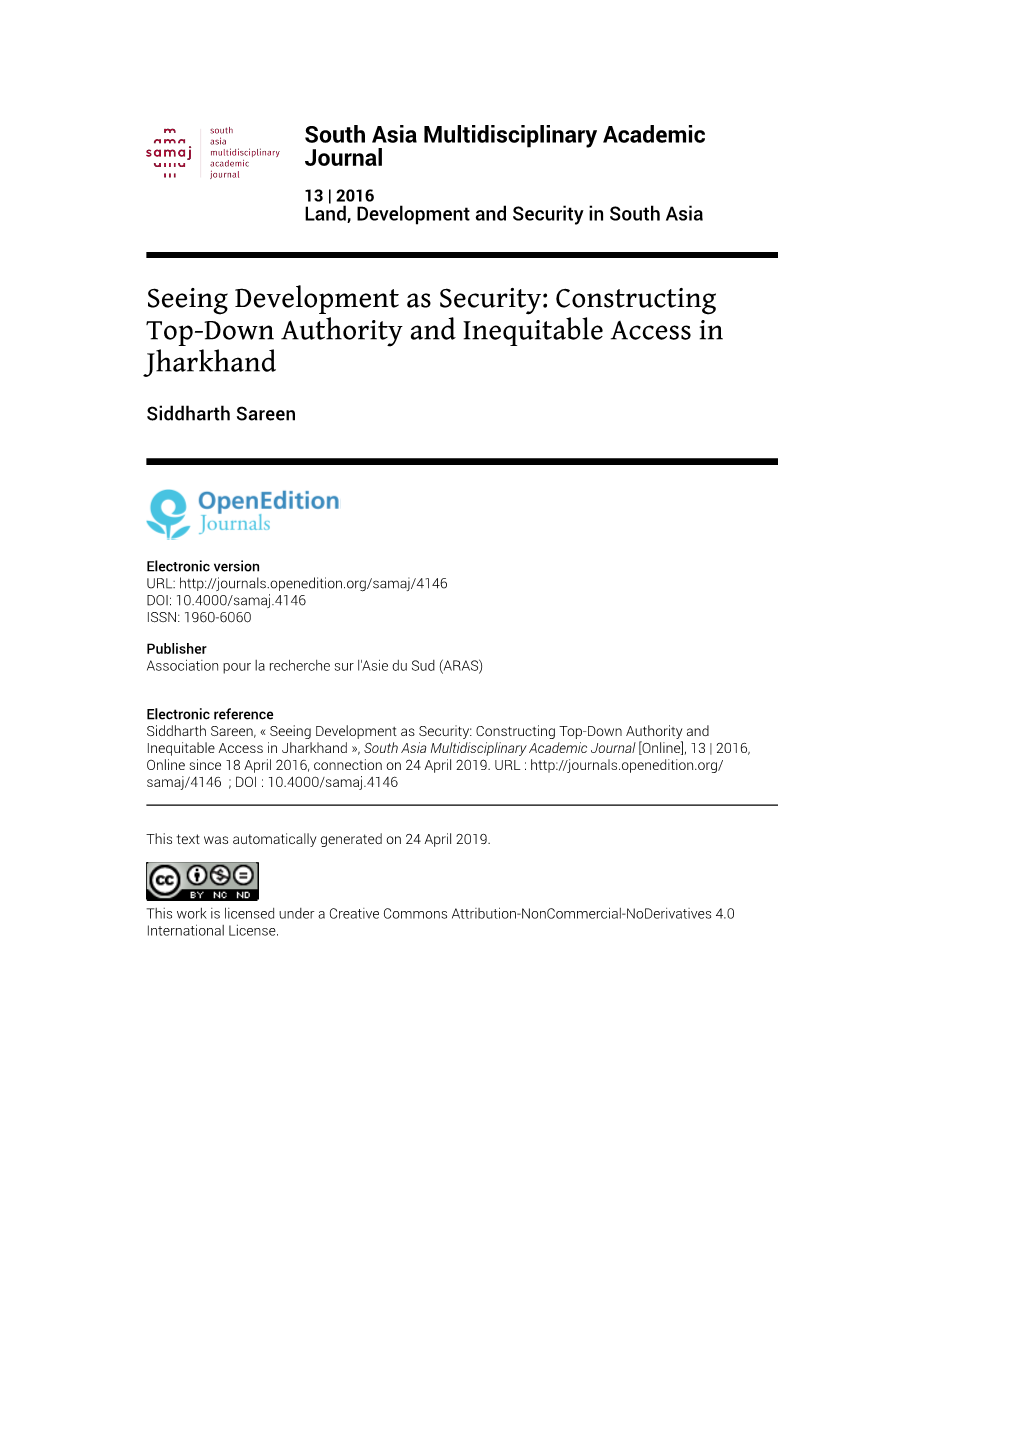 South Asia Multidisciplinary Academic Journal, 13 | 2016 Seeing Development As Security: Constructing Top-Down Authority and Inequitab